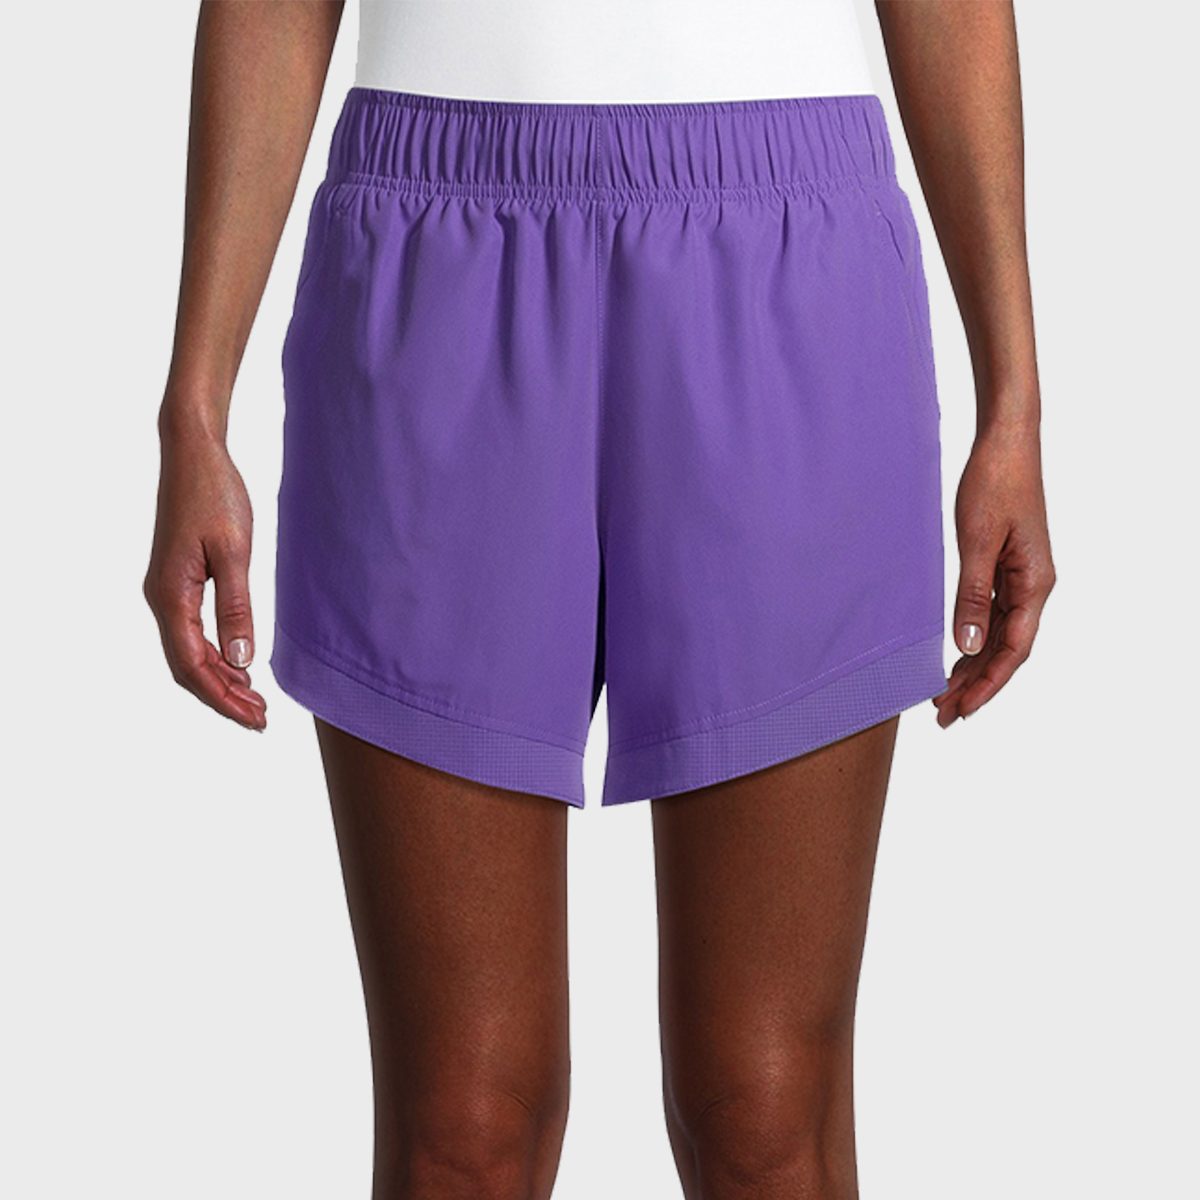 The Best Workout Shorts for Women | Reader's Digest